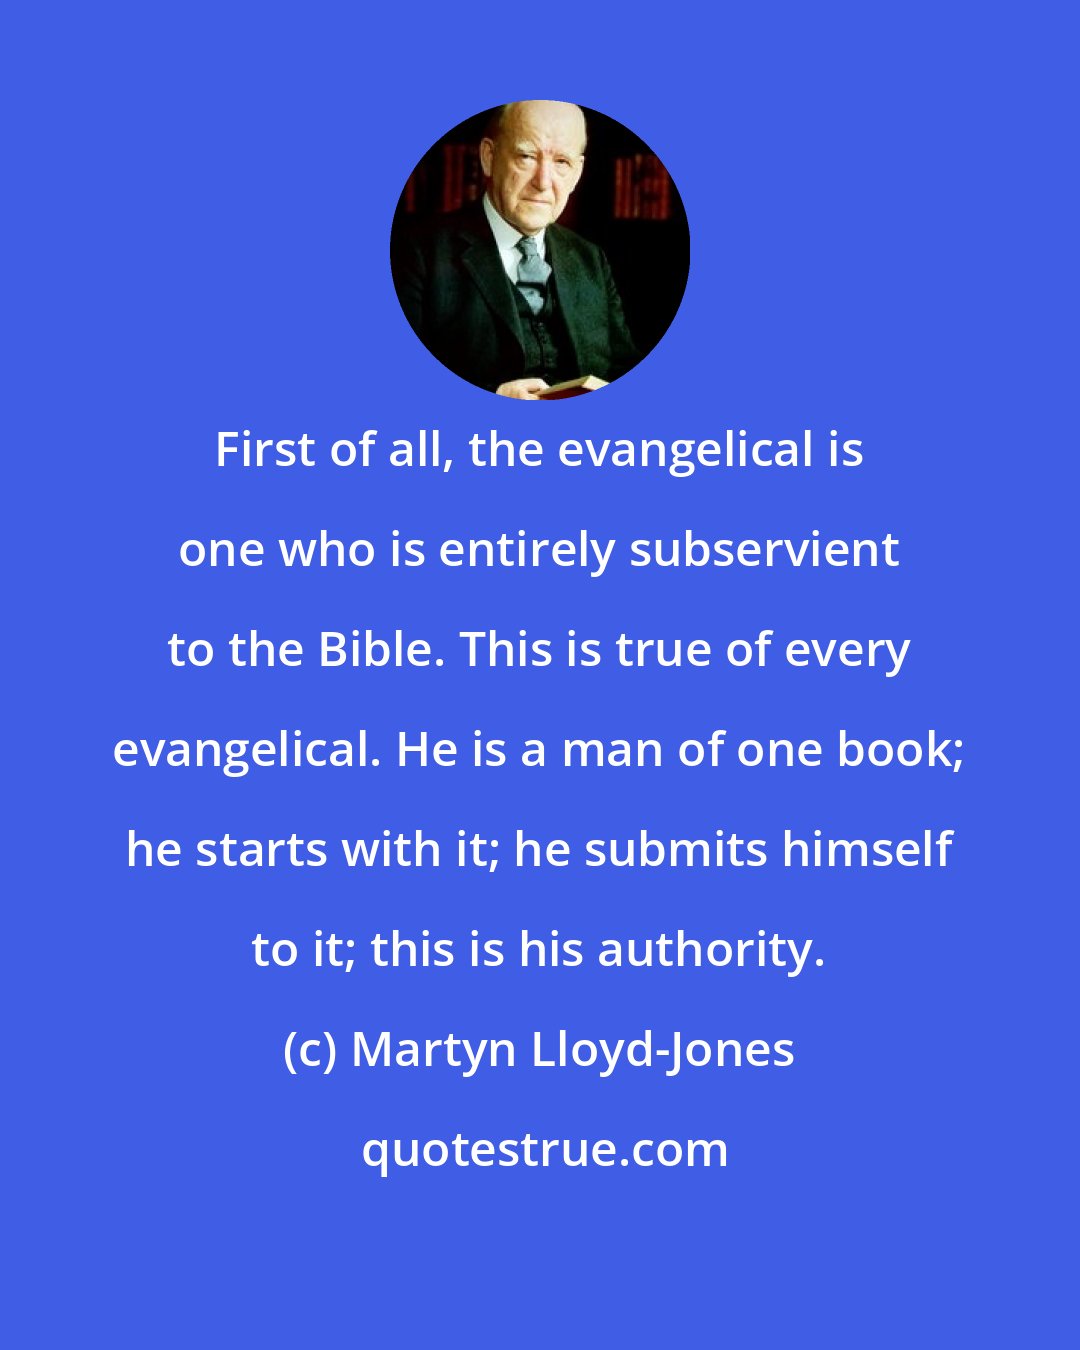 Martyn Lloyd-Jones: First of all, the evangelical is one who is entirely subservient to the Bible. This is true of every evangelical. He is a man of one book; he starts with it; he submits himself to it; this is his authority.